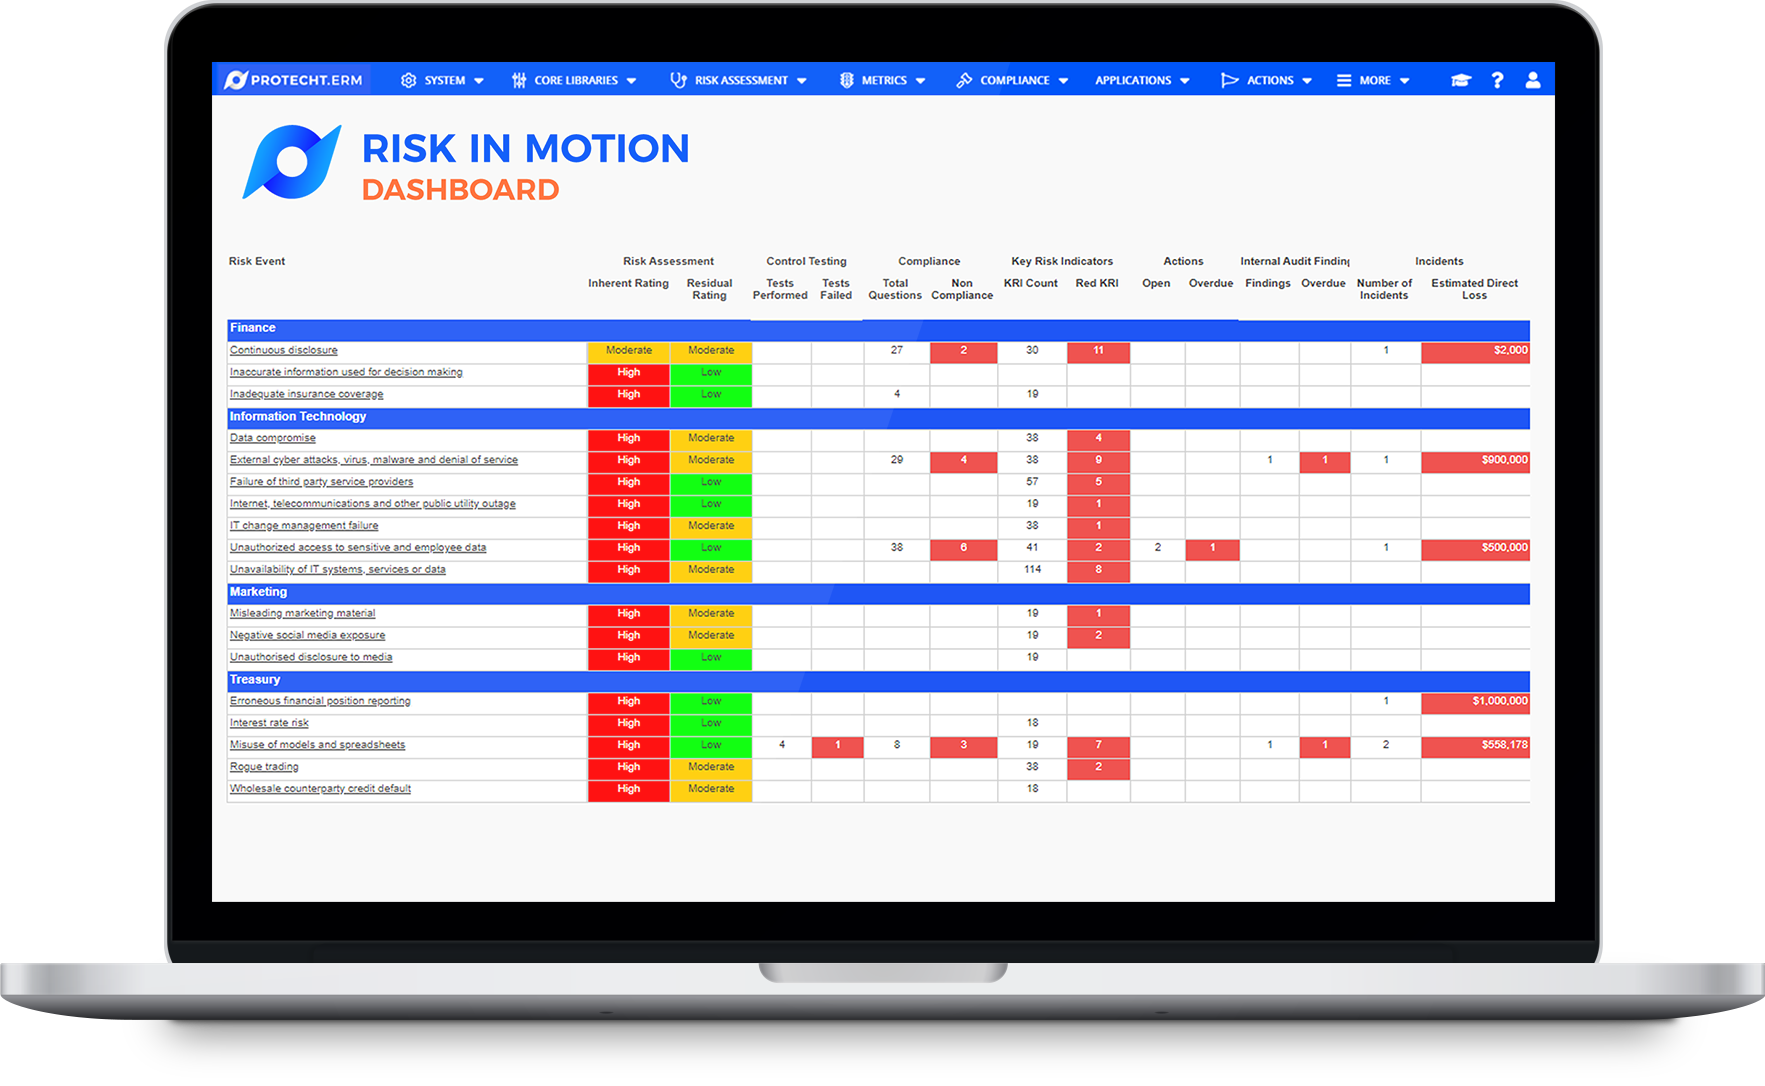 Protecht.ERM's RiskInMotion dashboard showing assessments, controls, compliance, KRIs, actions and more all linked to risks